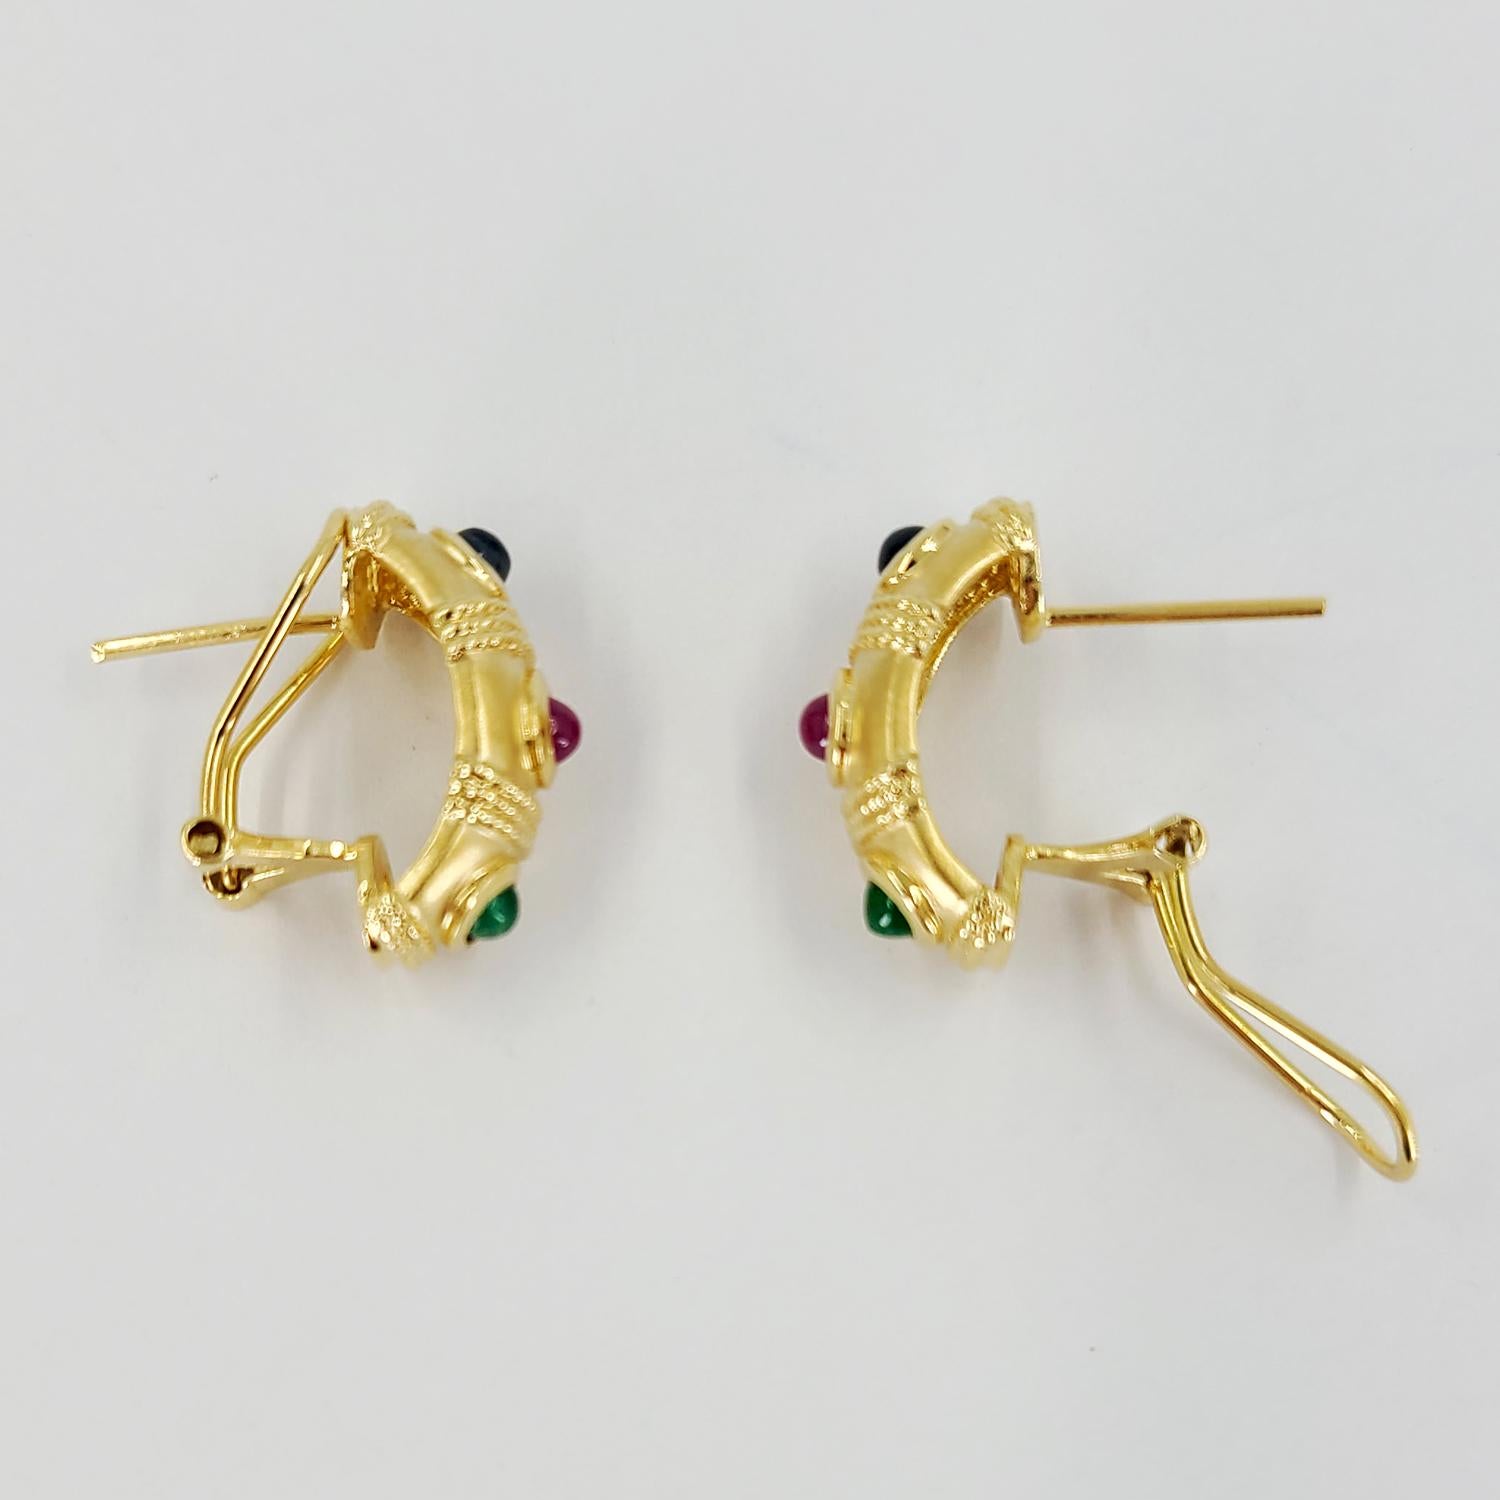 Women's 14 Karat Yellow Gold Huggie Earrings with Ruby, Sapphire, and Emerald Cabochon